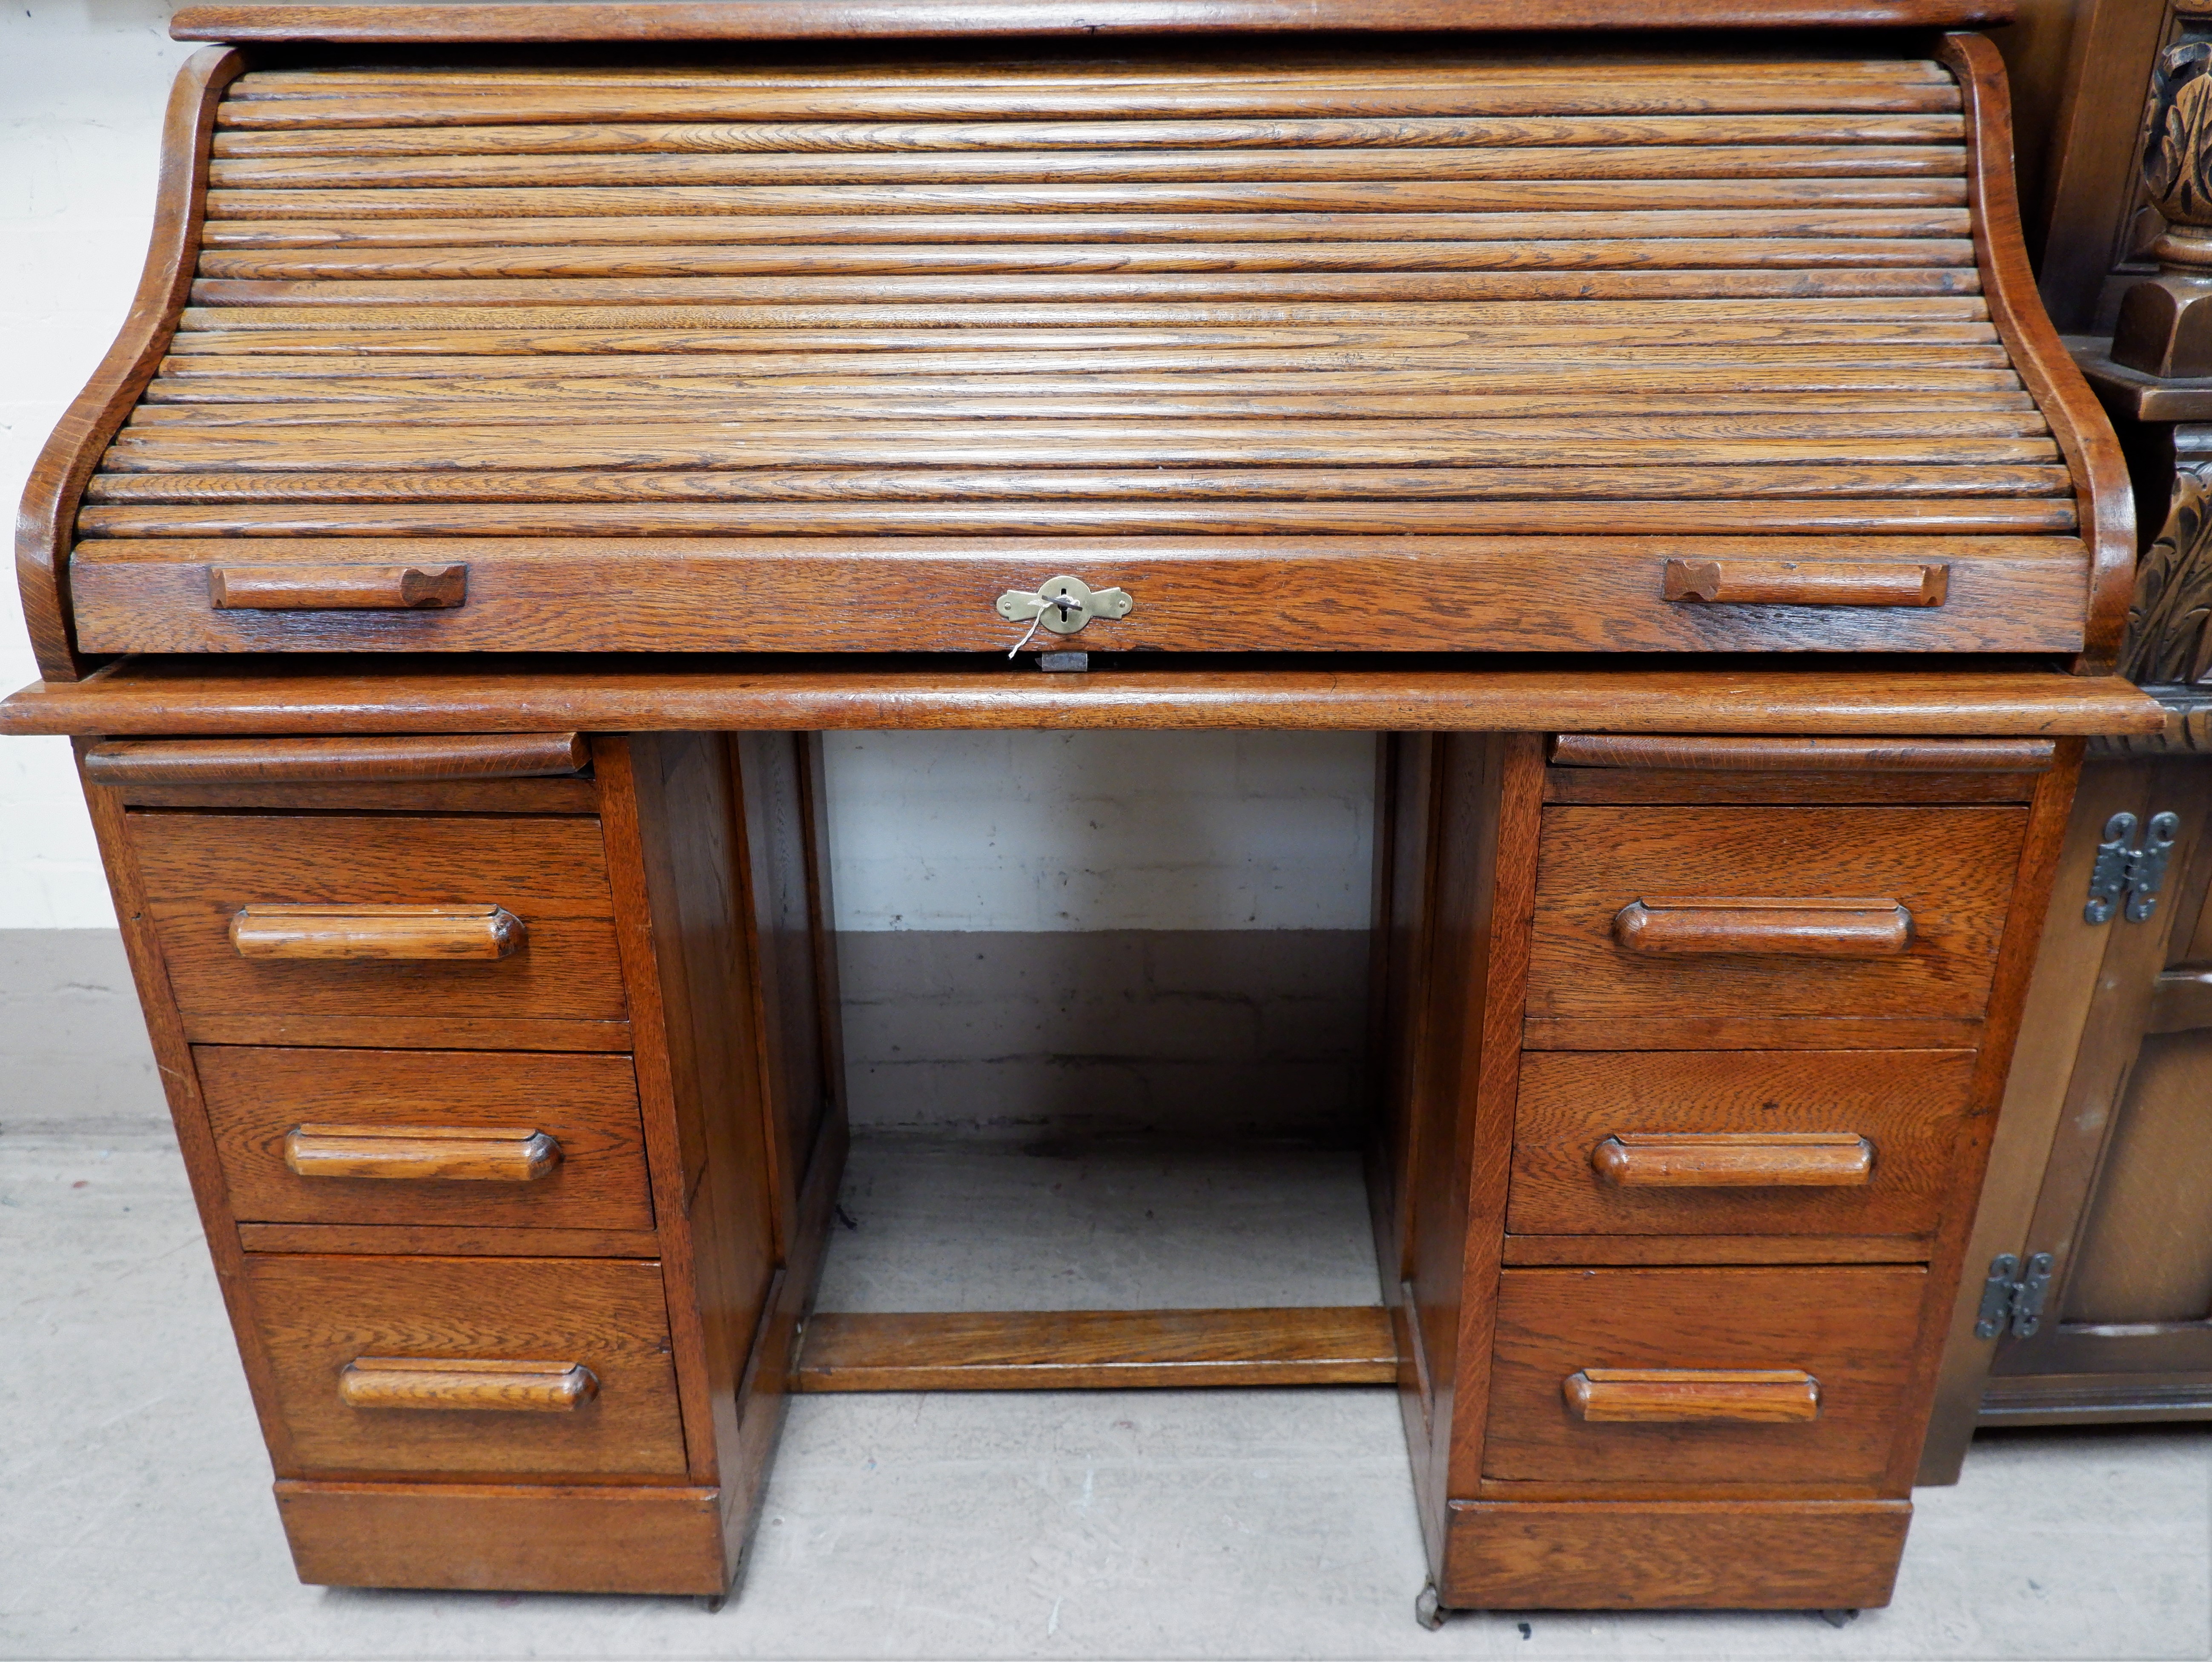 An early 20th century roll top desk with 'S' shaped scroll, part fitted interior and 6 drawers - Image 2 of 2